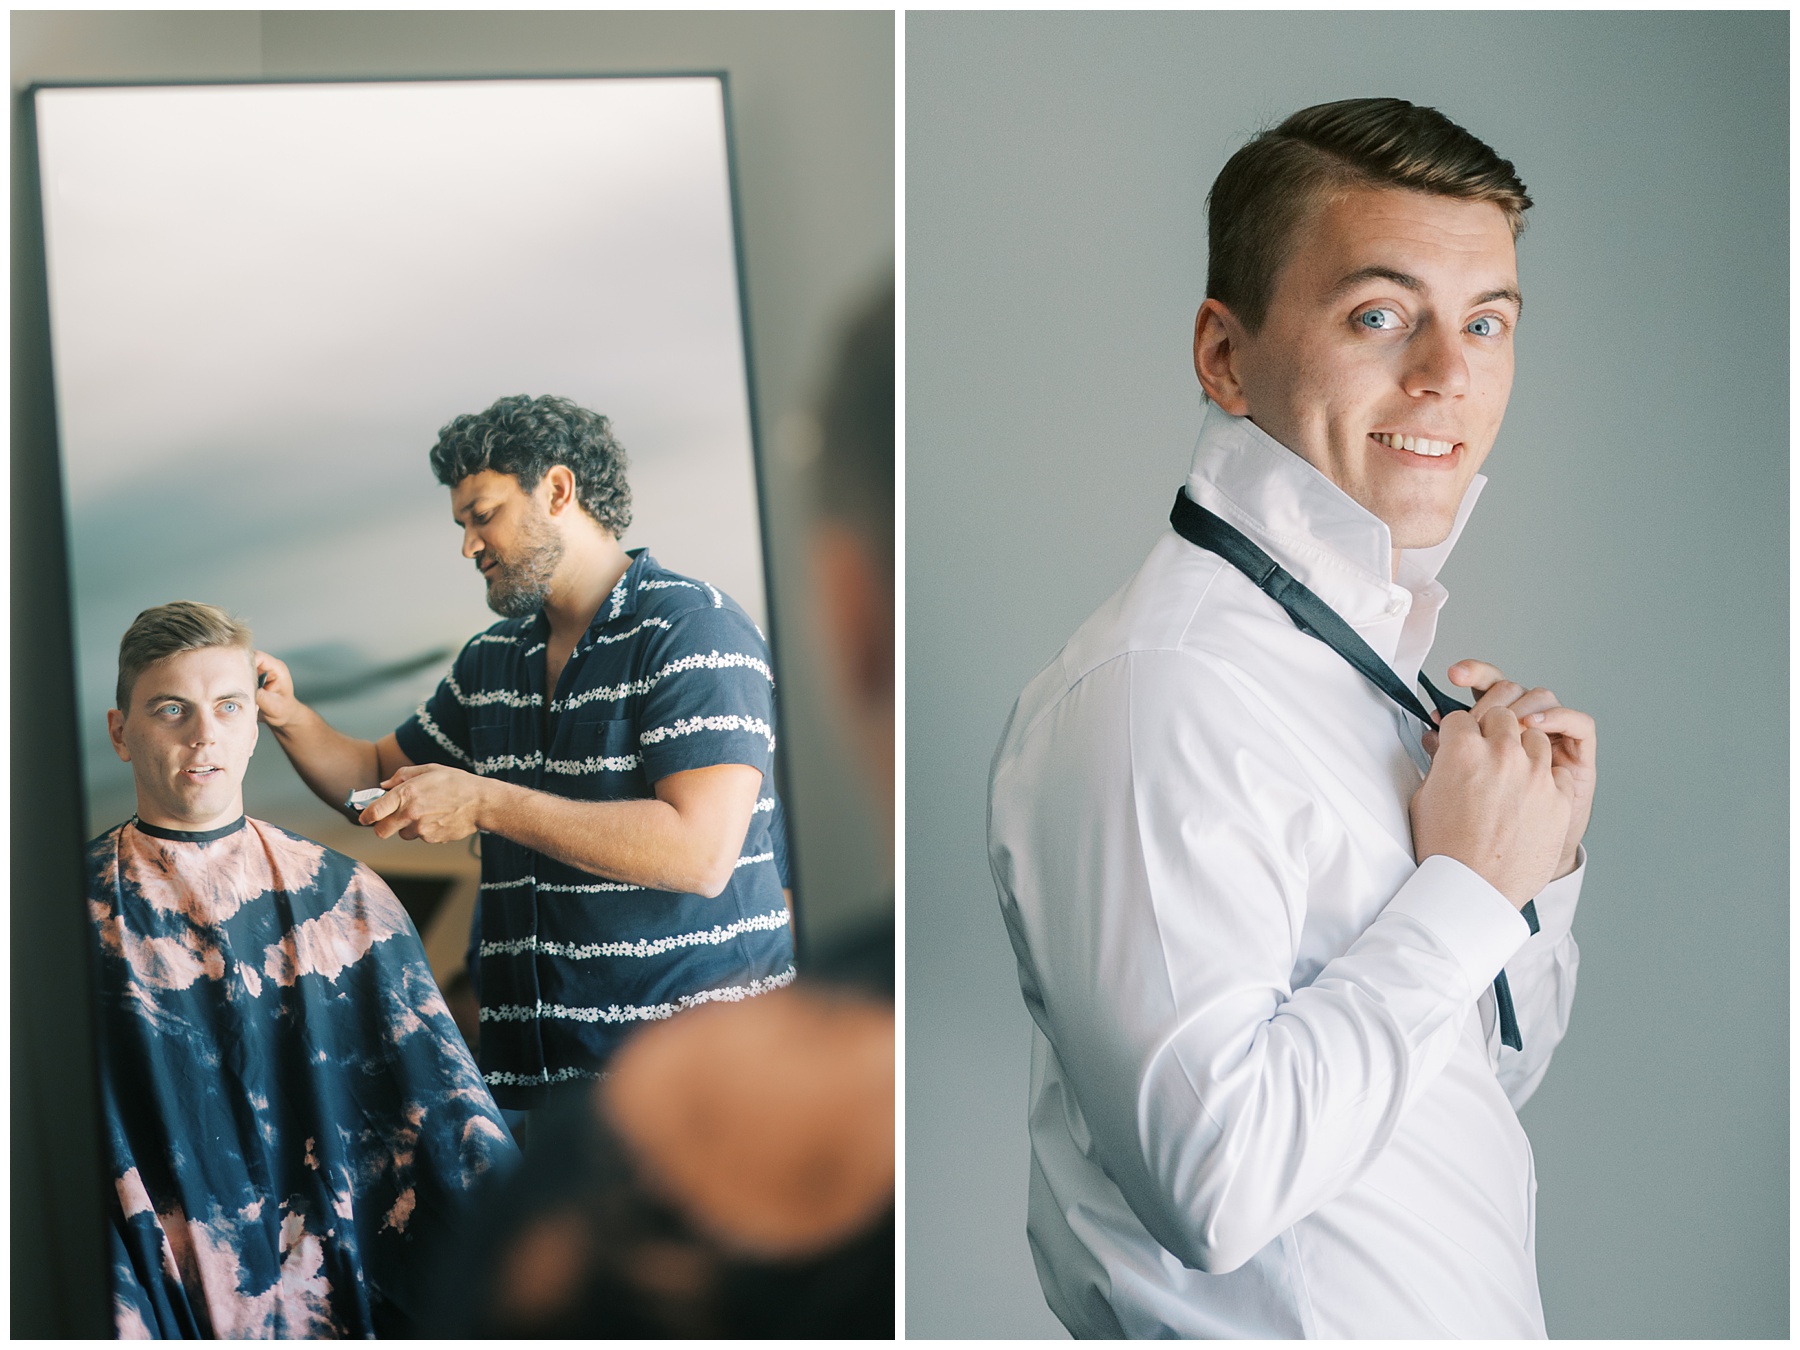 barber gives groom hair cut on wedding morning while he adjusts bowtie around neck